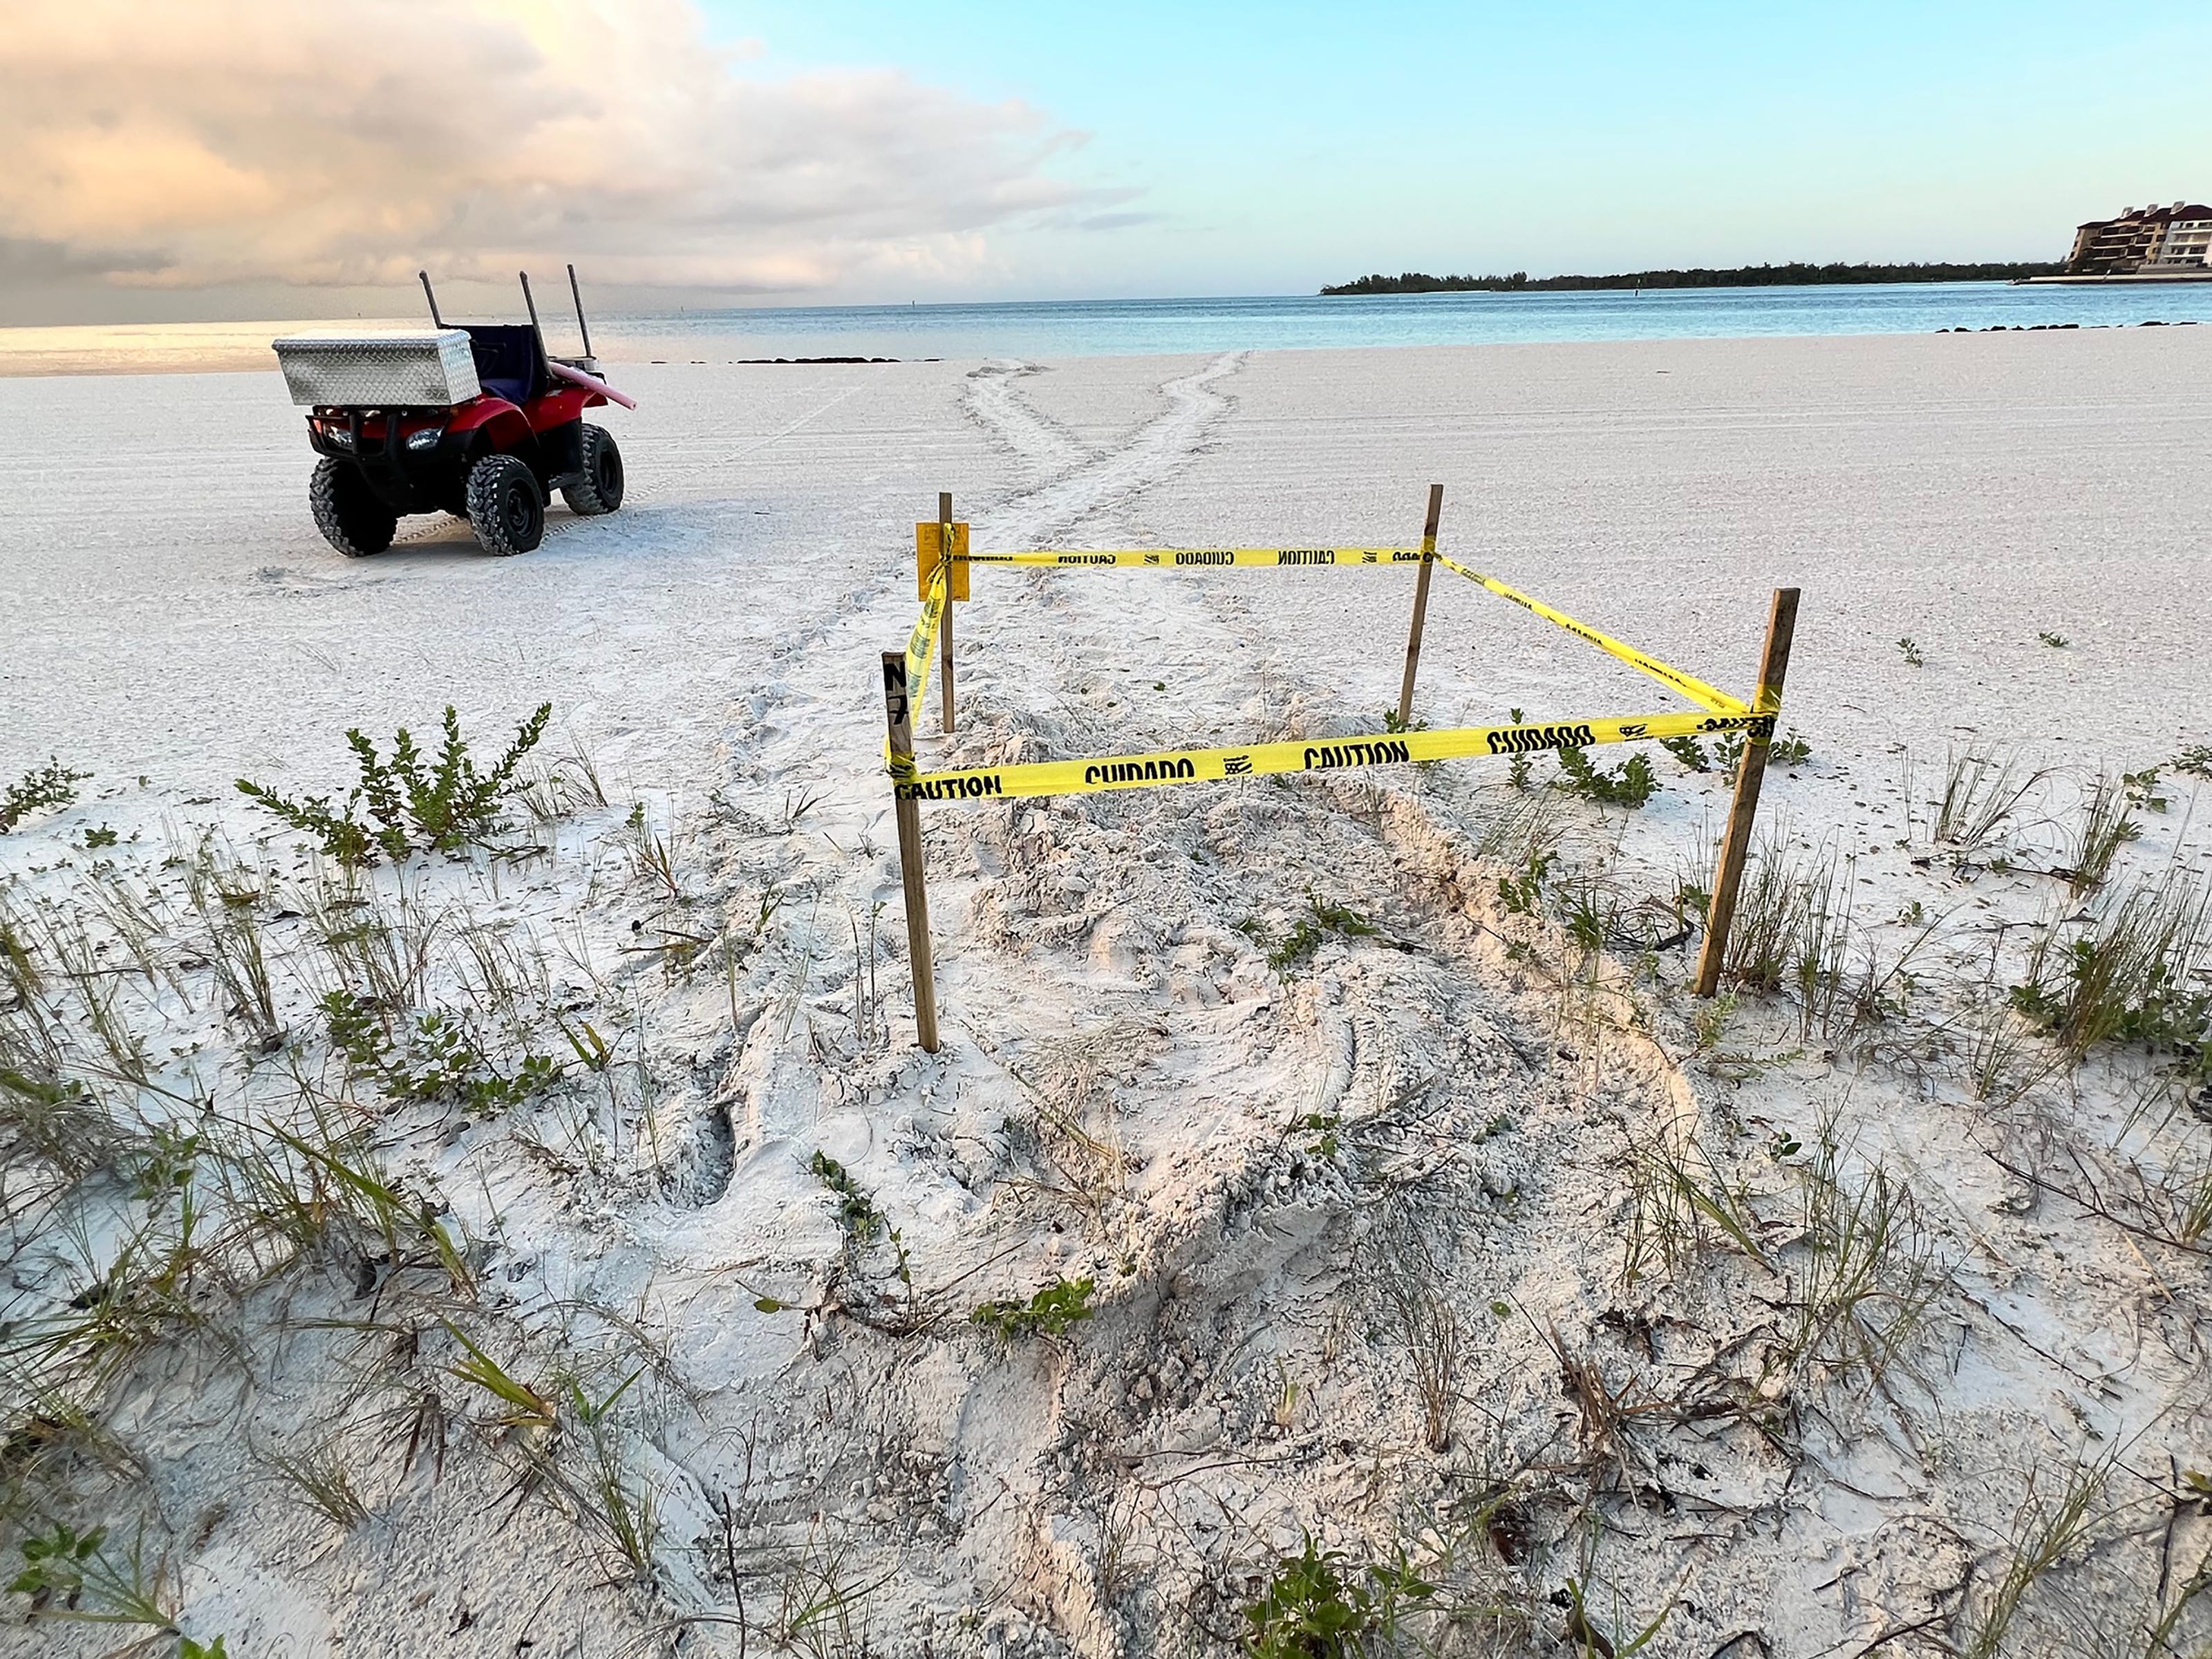 On Marco Island the county has hired workers to monitor sea turtles. They scour the beach from their ATV’s and mark any nests they find.